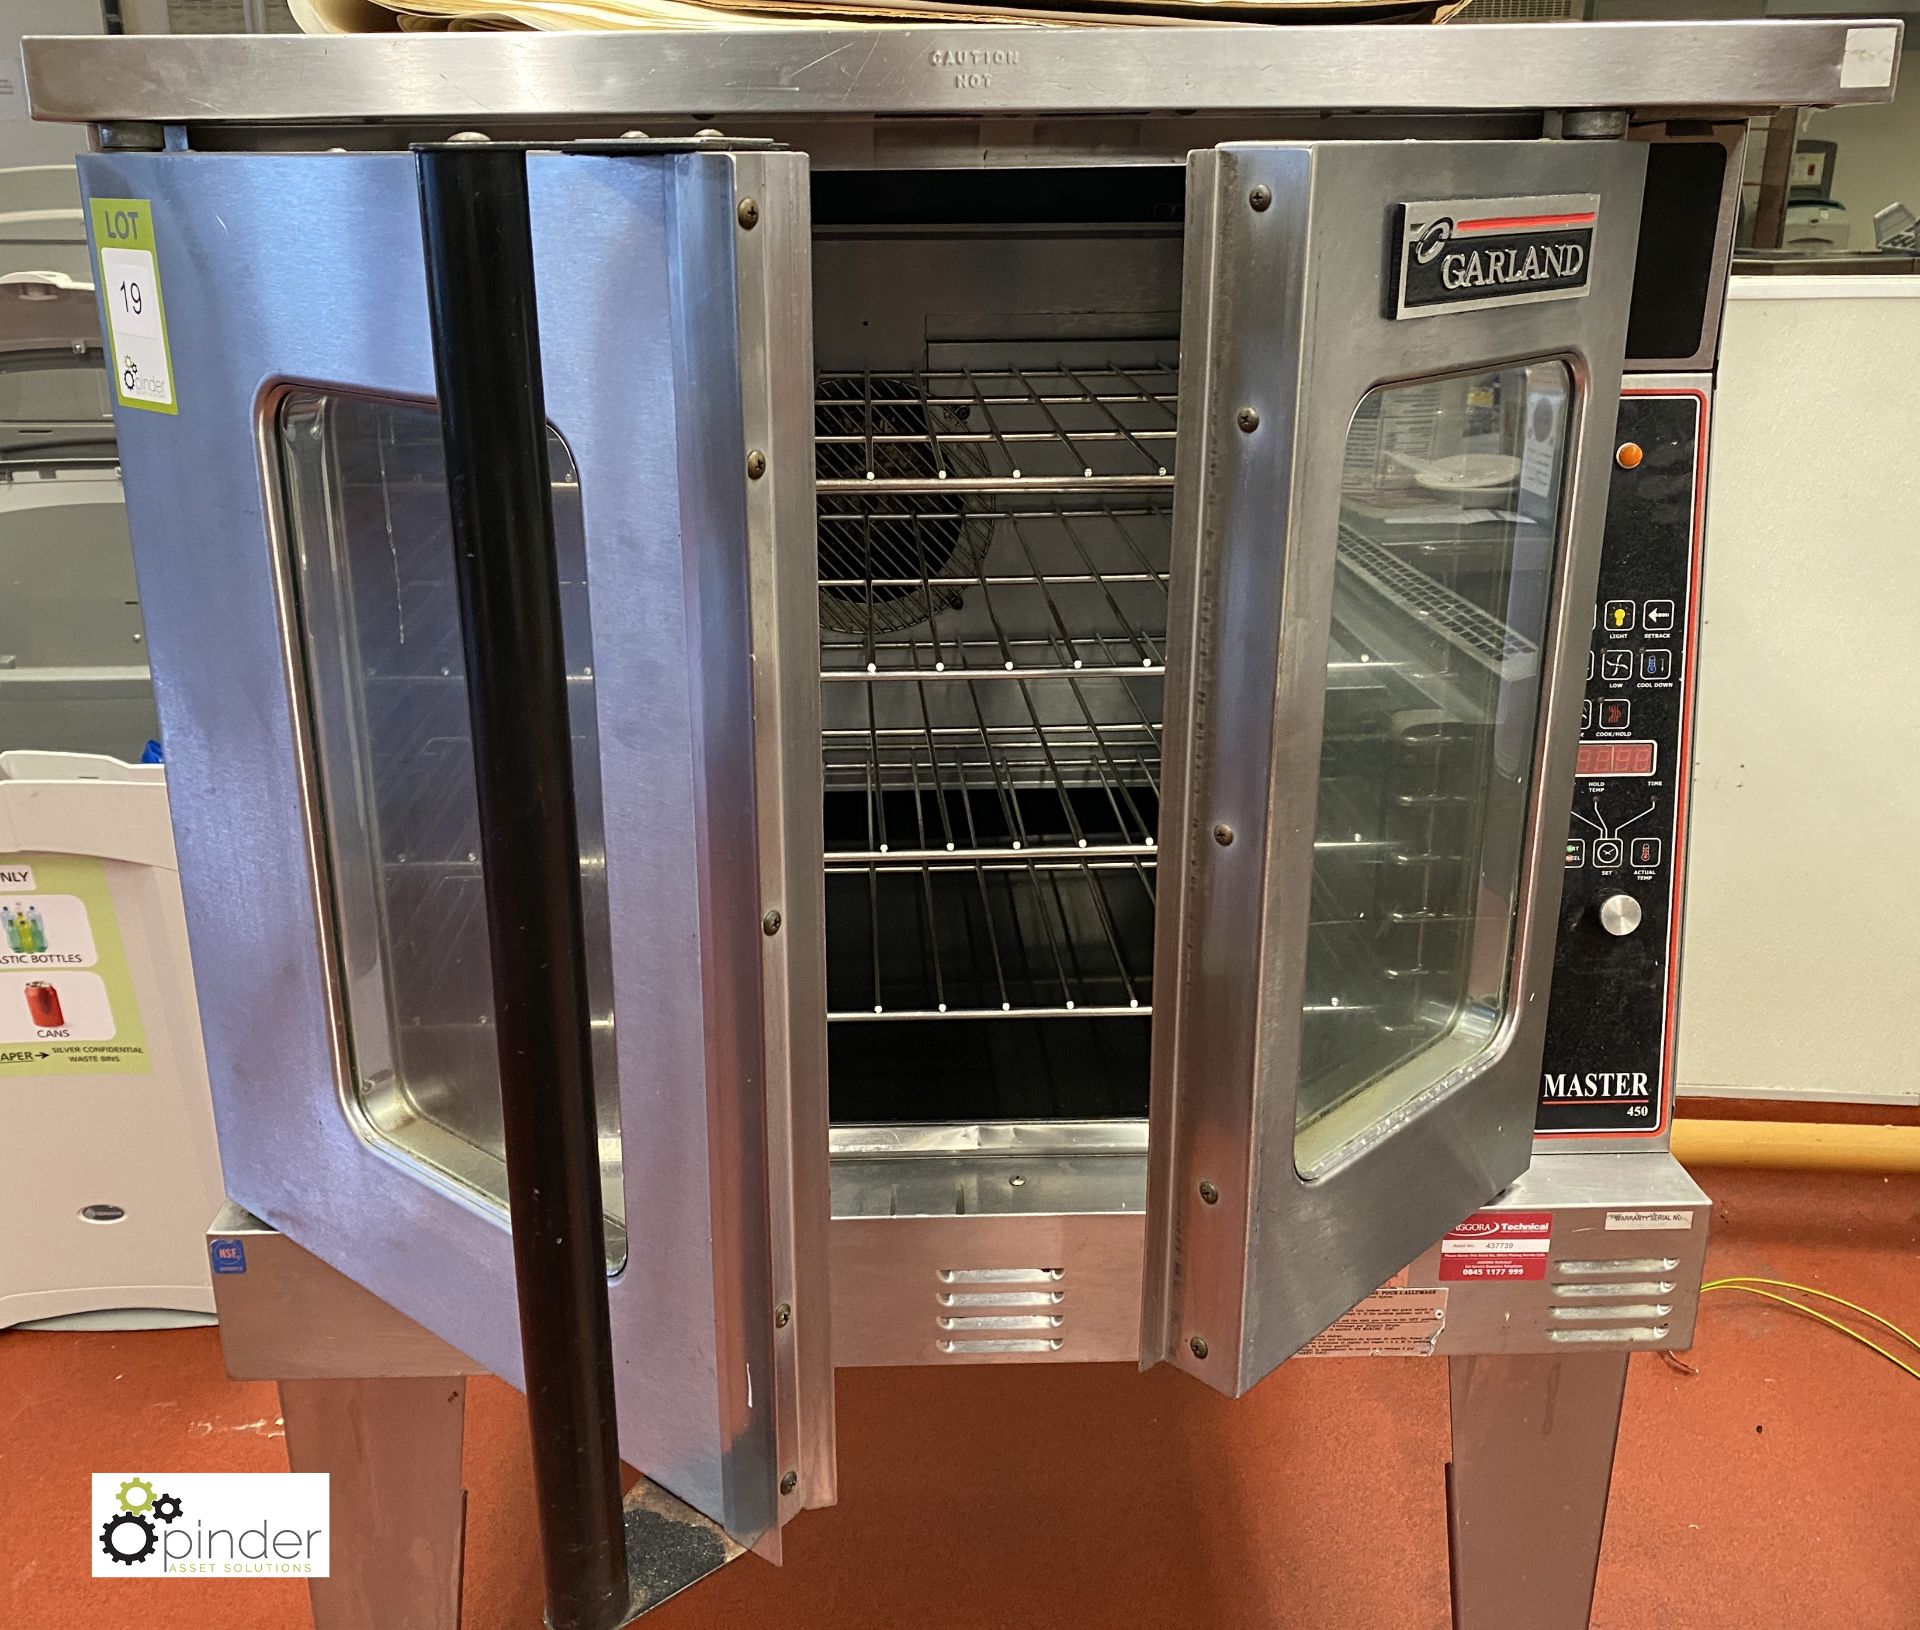 Garland Master 450 gas fired Convection Oven, 970mm x 970mm x 1460mm (lot location – Parkview - Image 5 of 7